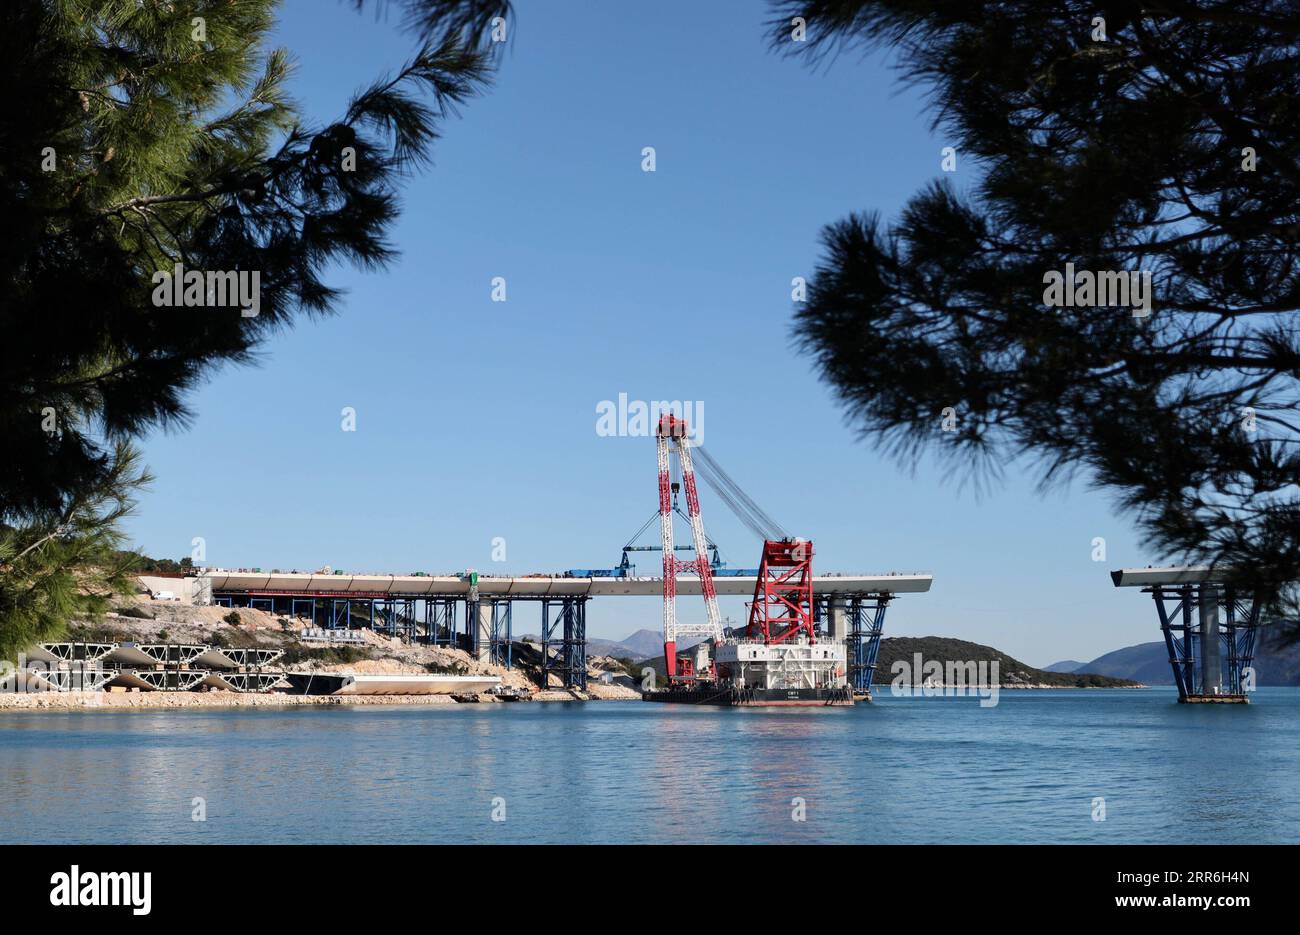 210215 -- KOMARNA CROATIA, Feb. 15, 2021 -- A crane carries a steel box girder to connect the Croatian mainland with the first sea-based pillar of the Peljesac Bridge near Komarna, Croatia, Feb. 15, 2021. The construction of the Peljesac Bridge, the biggest infrastructure project in Croatia, will be completed in June 2022, Prime Minister Andrej Plenkovic announced on Monday after visiting the site. The 2.4-kilometer-long Peljesac Bridge connects Croatia s southernmost Dubrovnik-Neretva County to the rest of the mainland, giving the southeastern European country a continuous land link that bypa Stock Photo